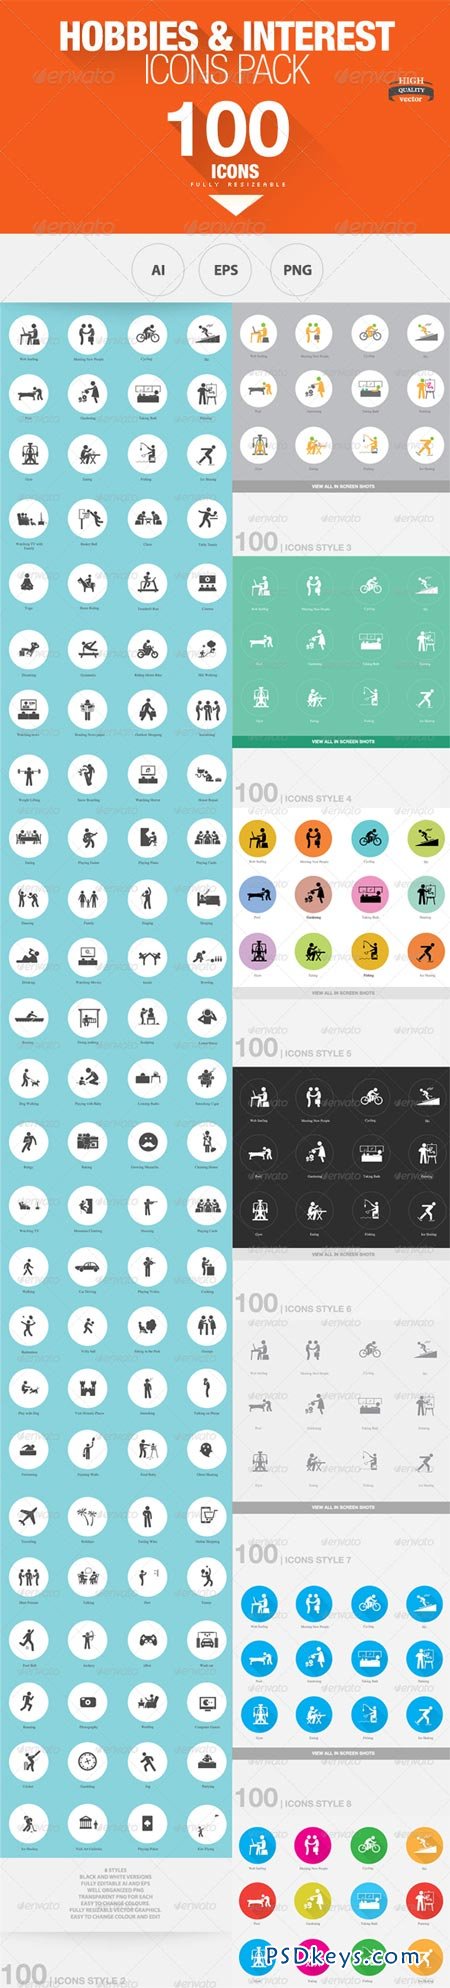 100 - Hobbies and Interests Icons